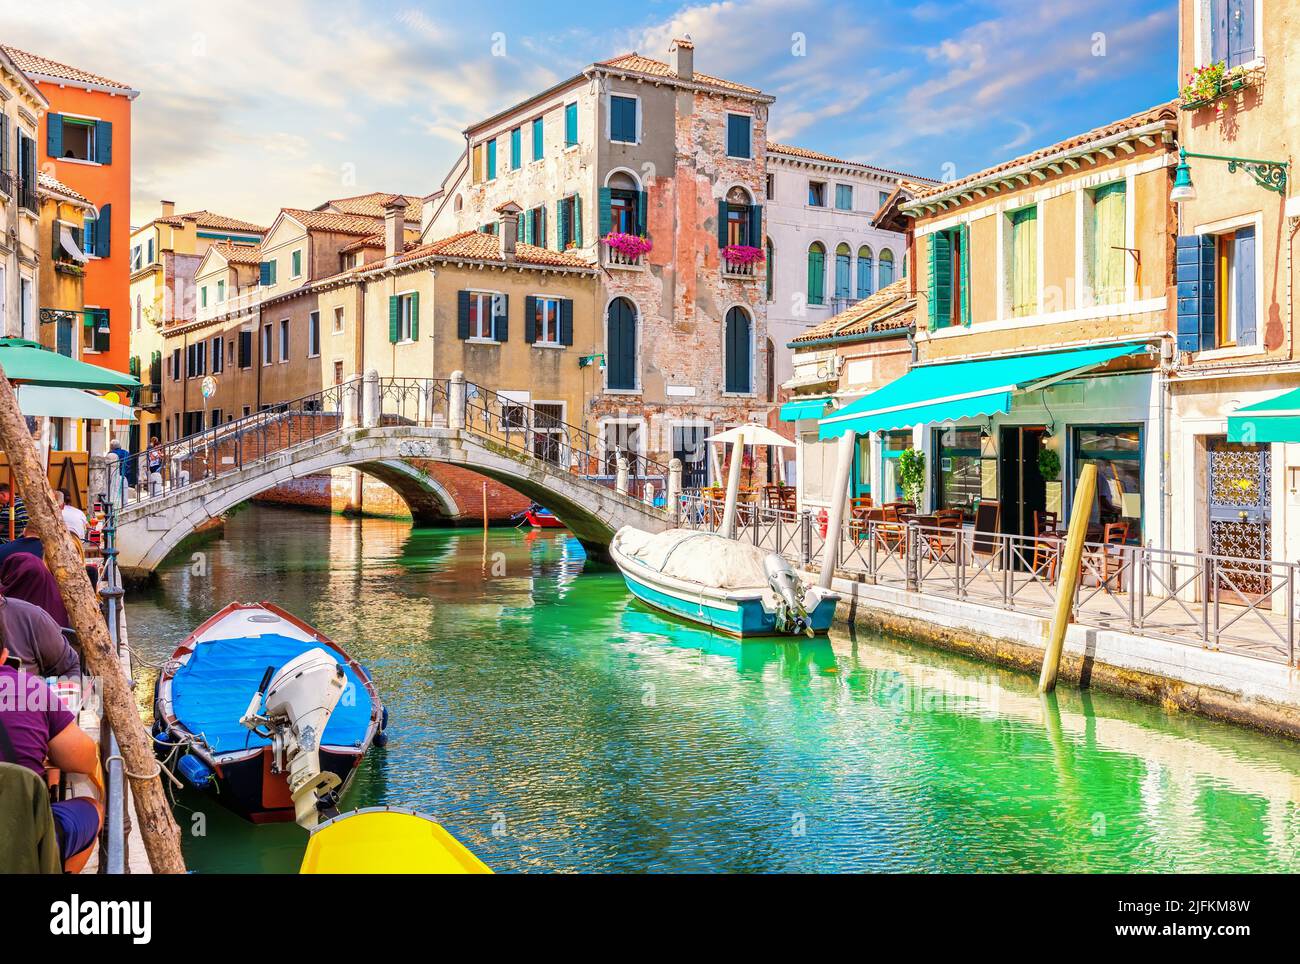 Medieval Bridge, Cafe and colorful houses in the Grand Canal, Venice, Italy. Stock Photo